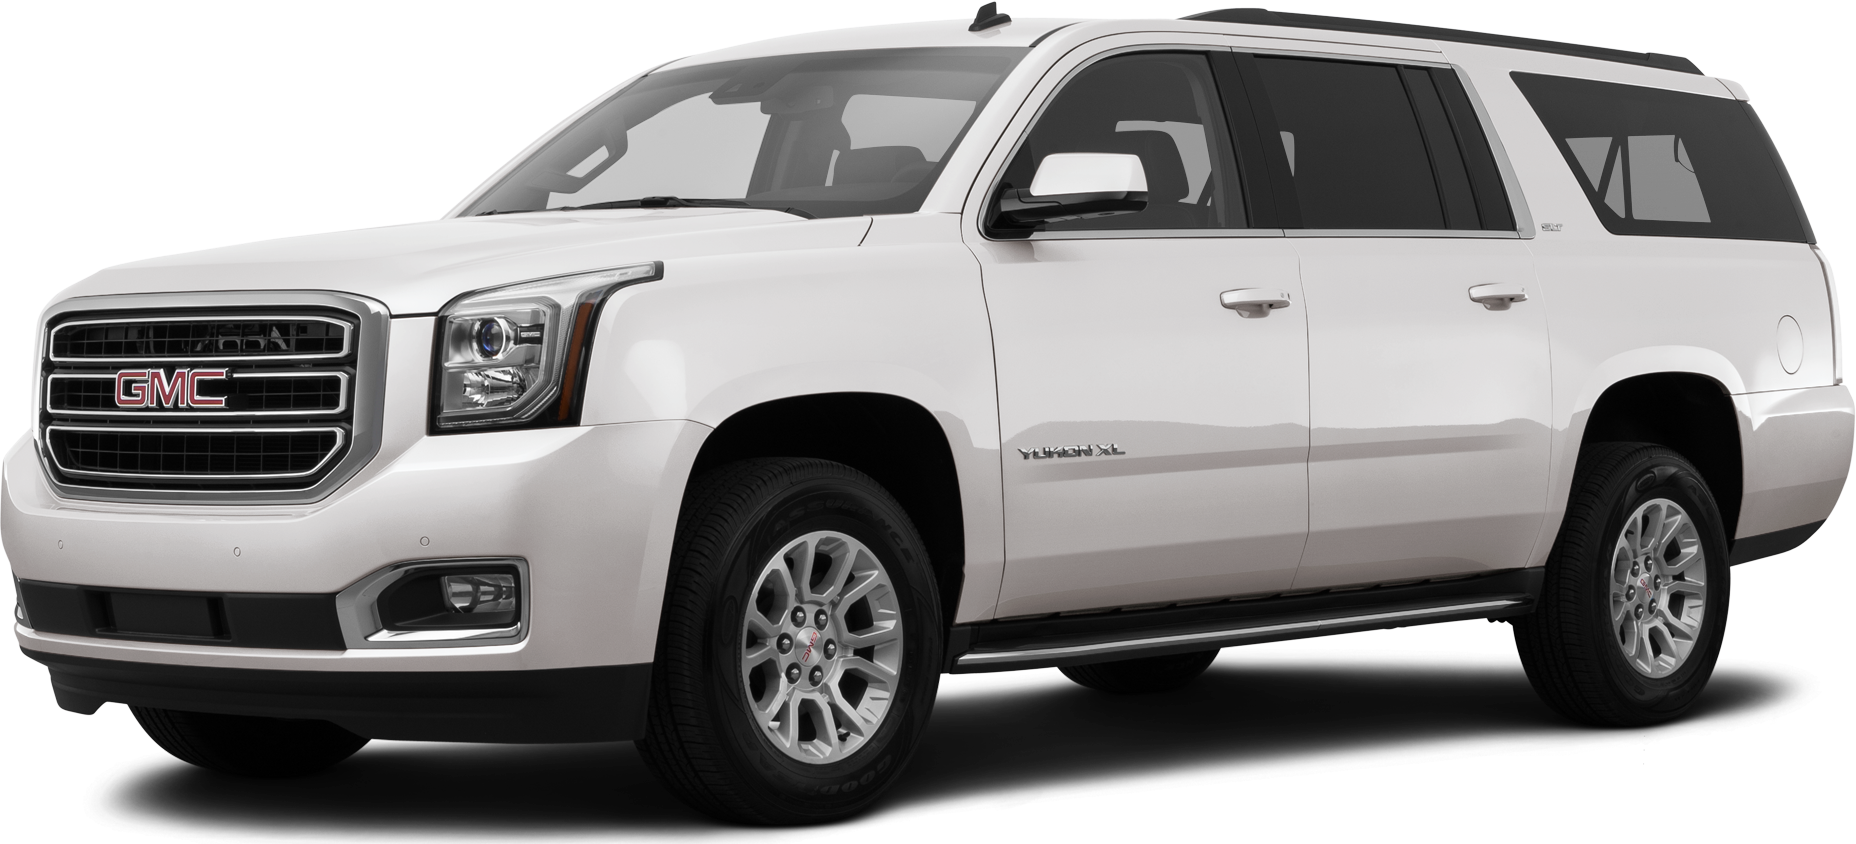 2015 Gmc Yukon Xl Price Value Ratings And Reviews Kelley Blue Book 5737